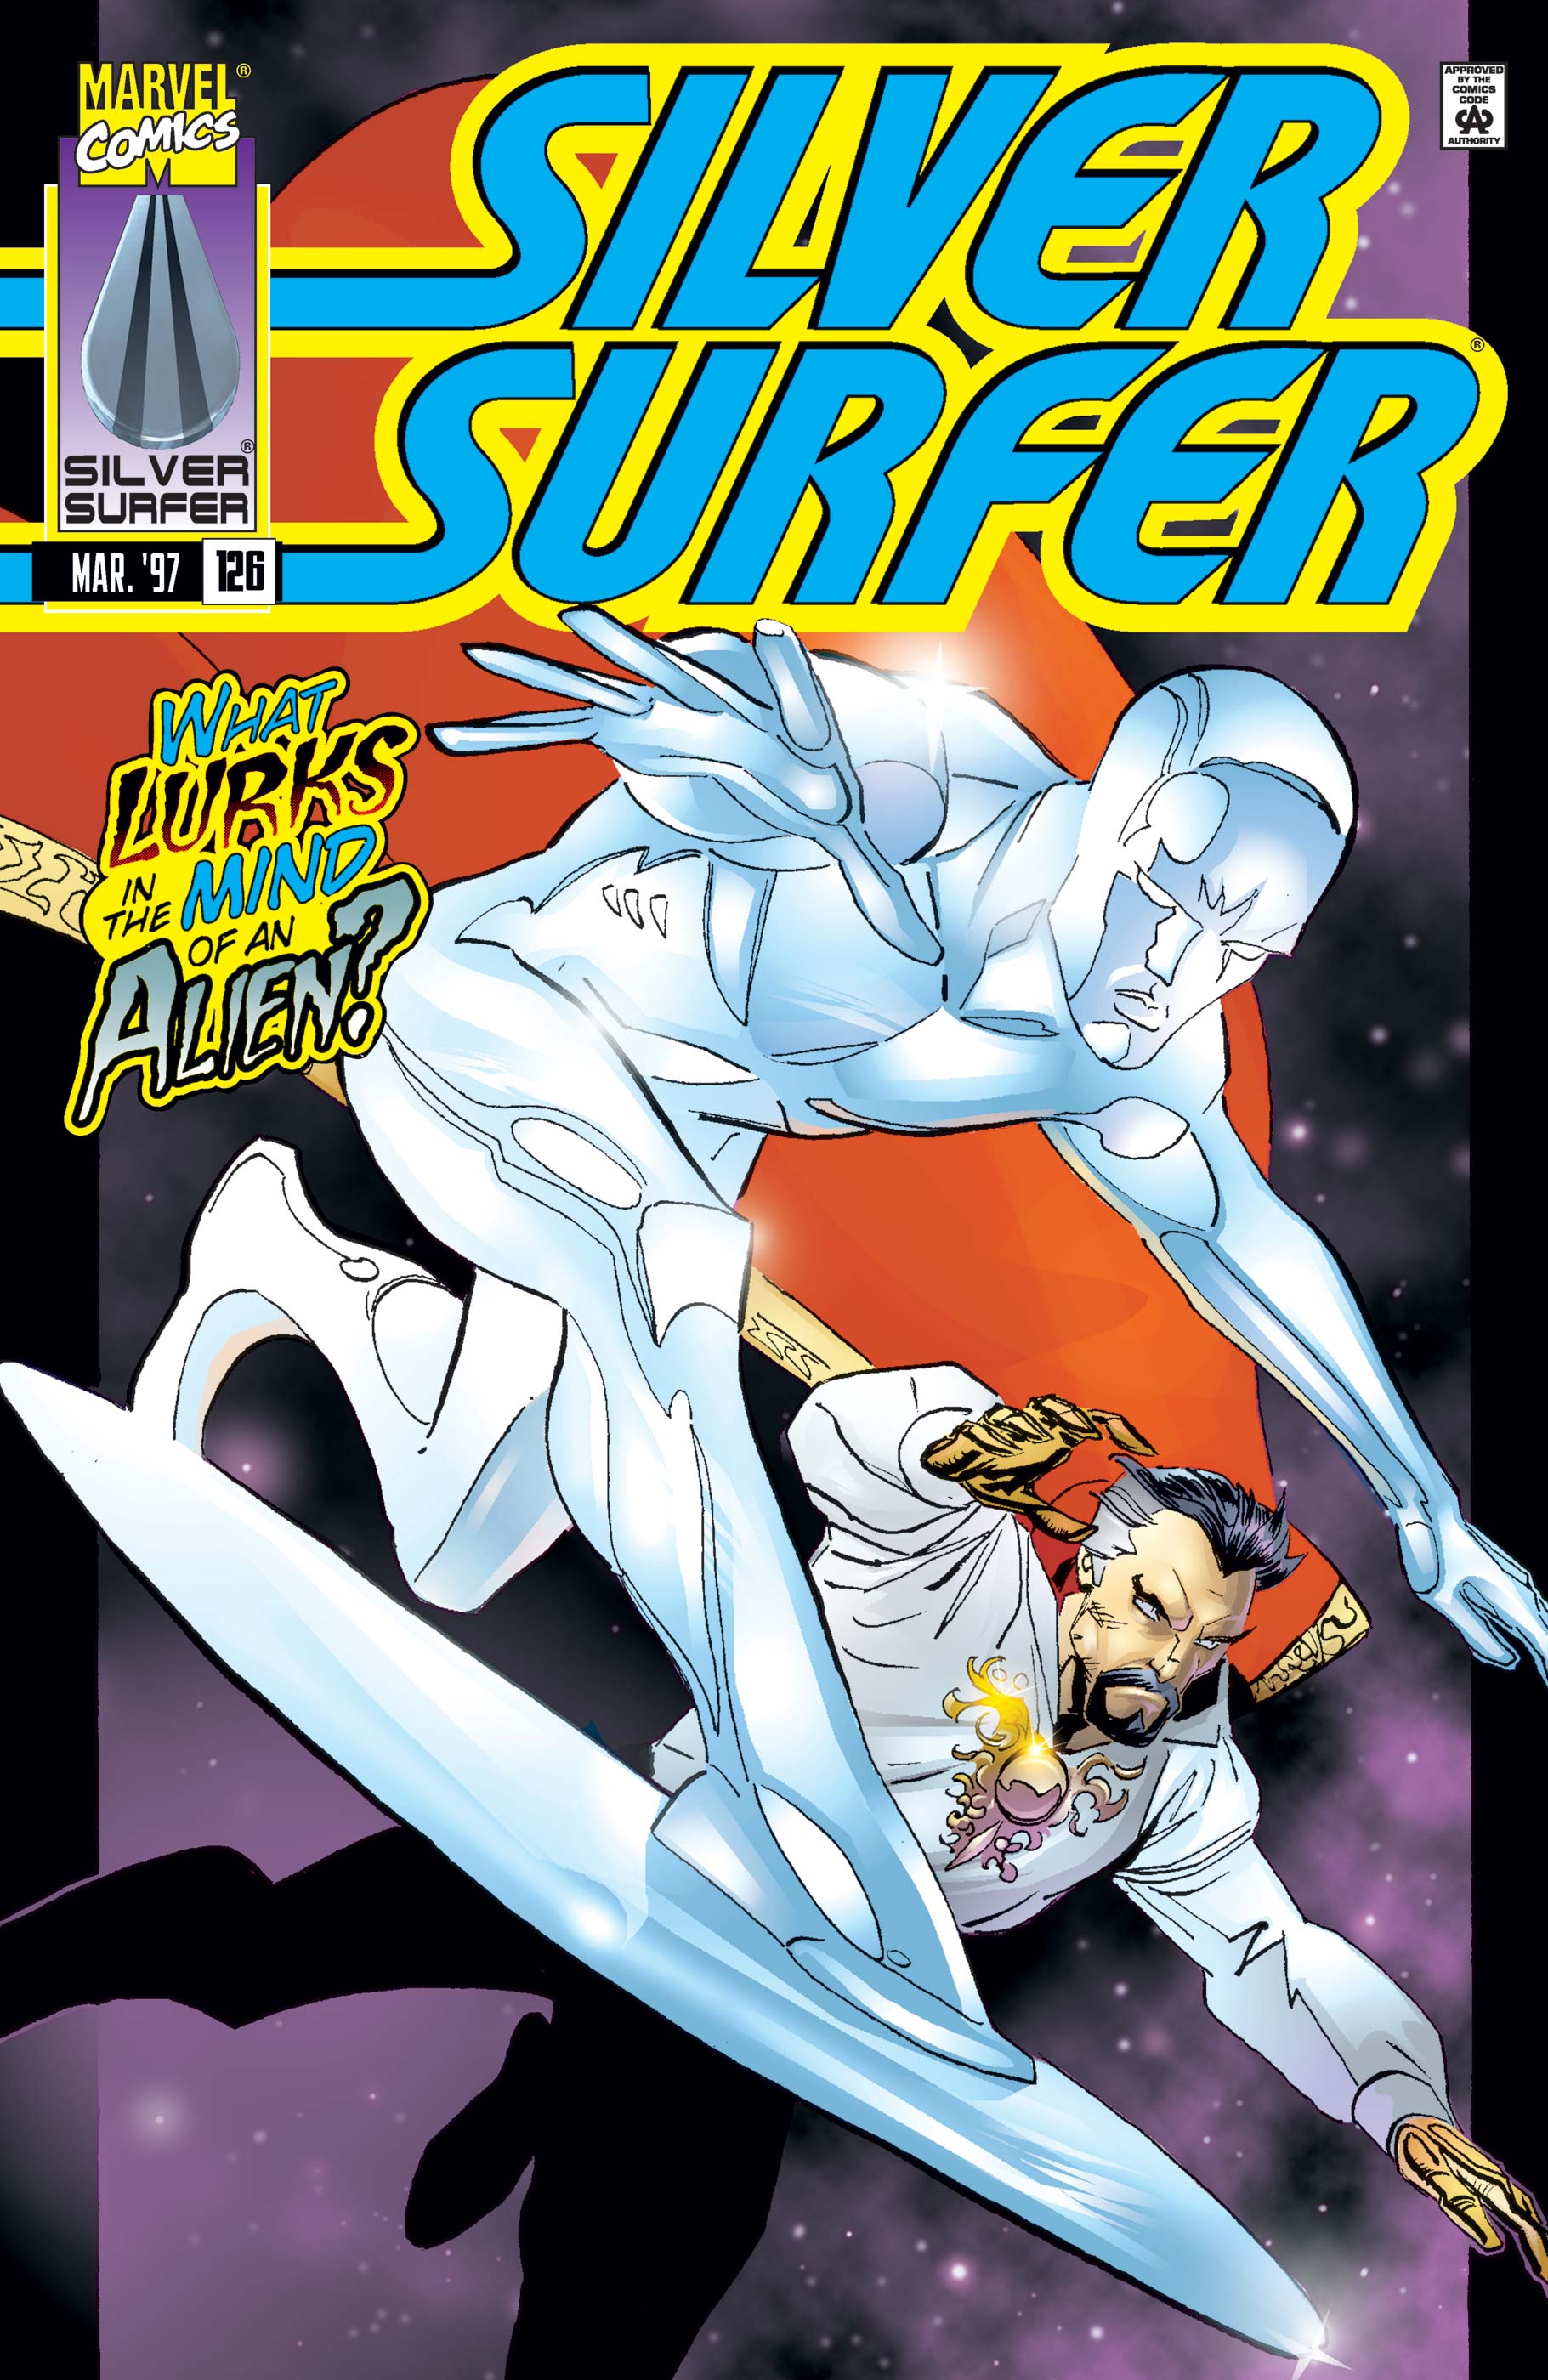 Silver Surfer (1987) #126 | Comic Issues | Marvel